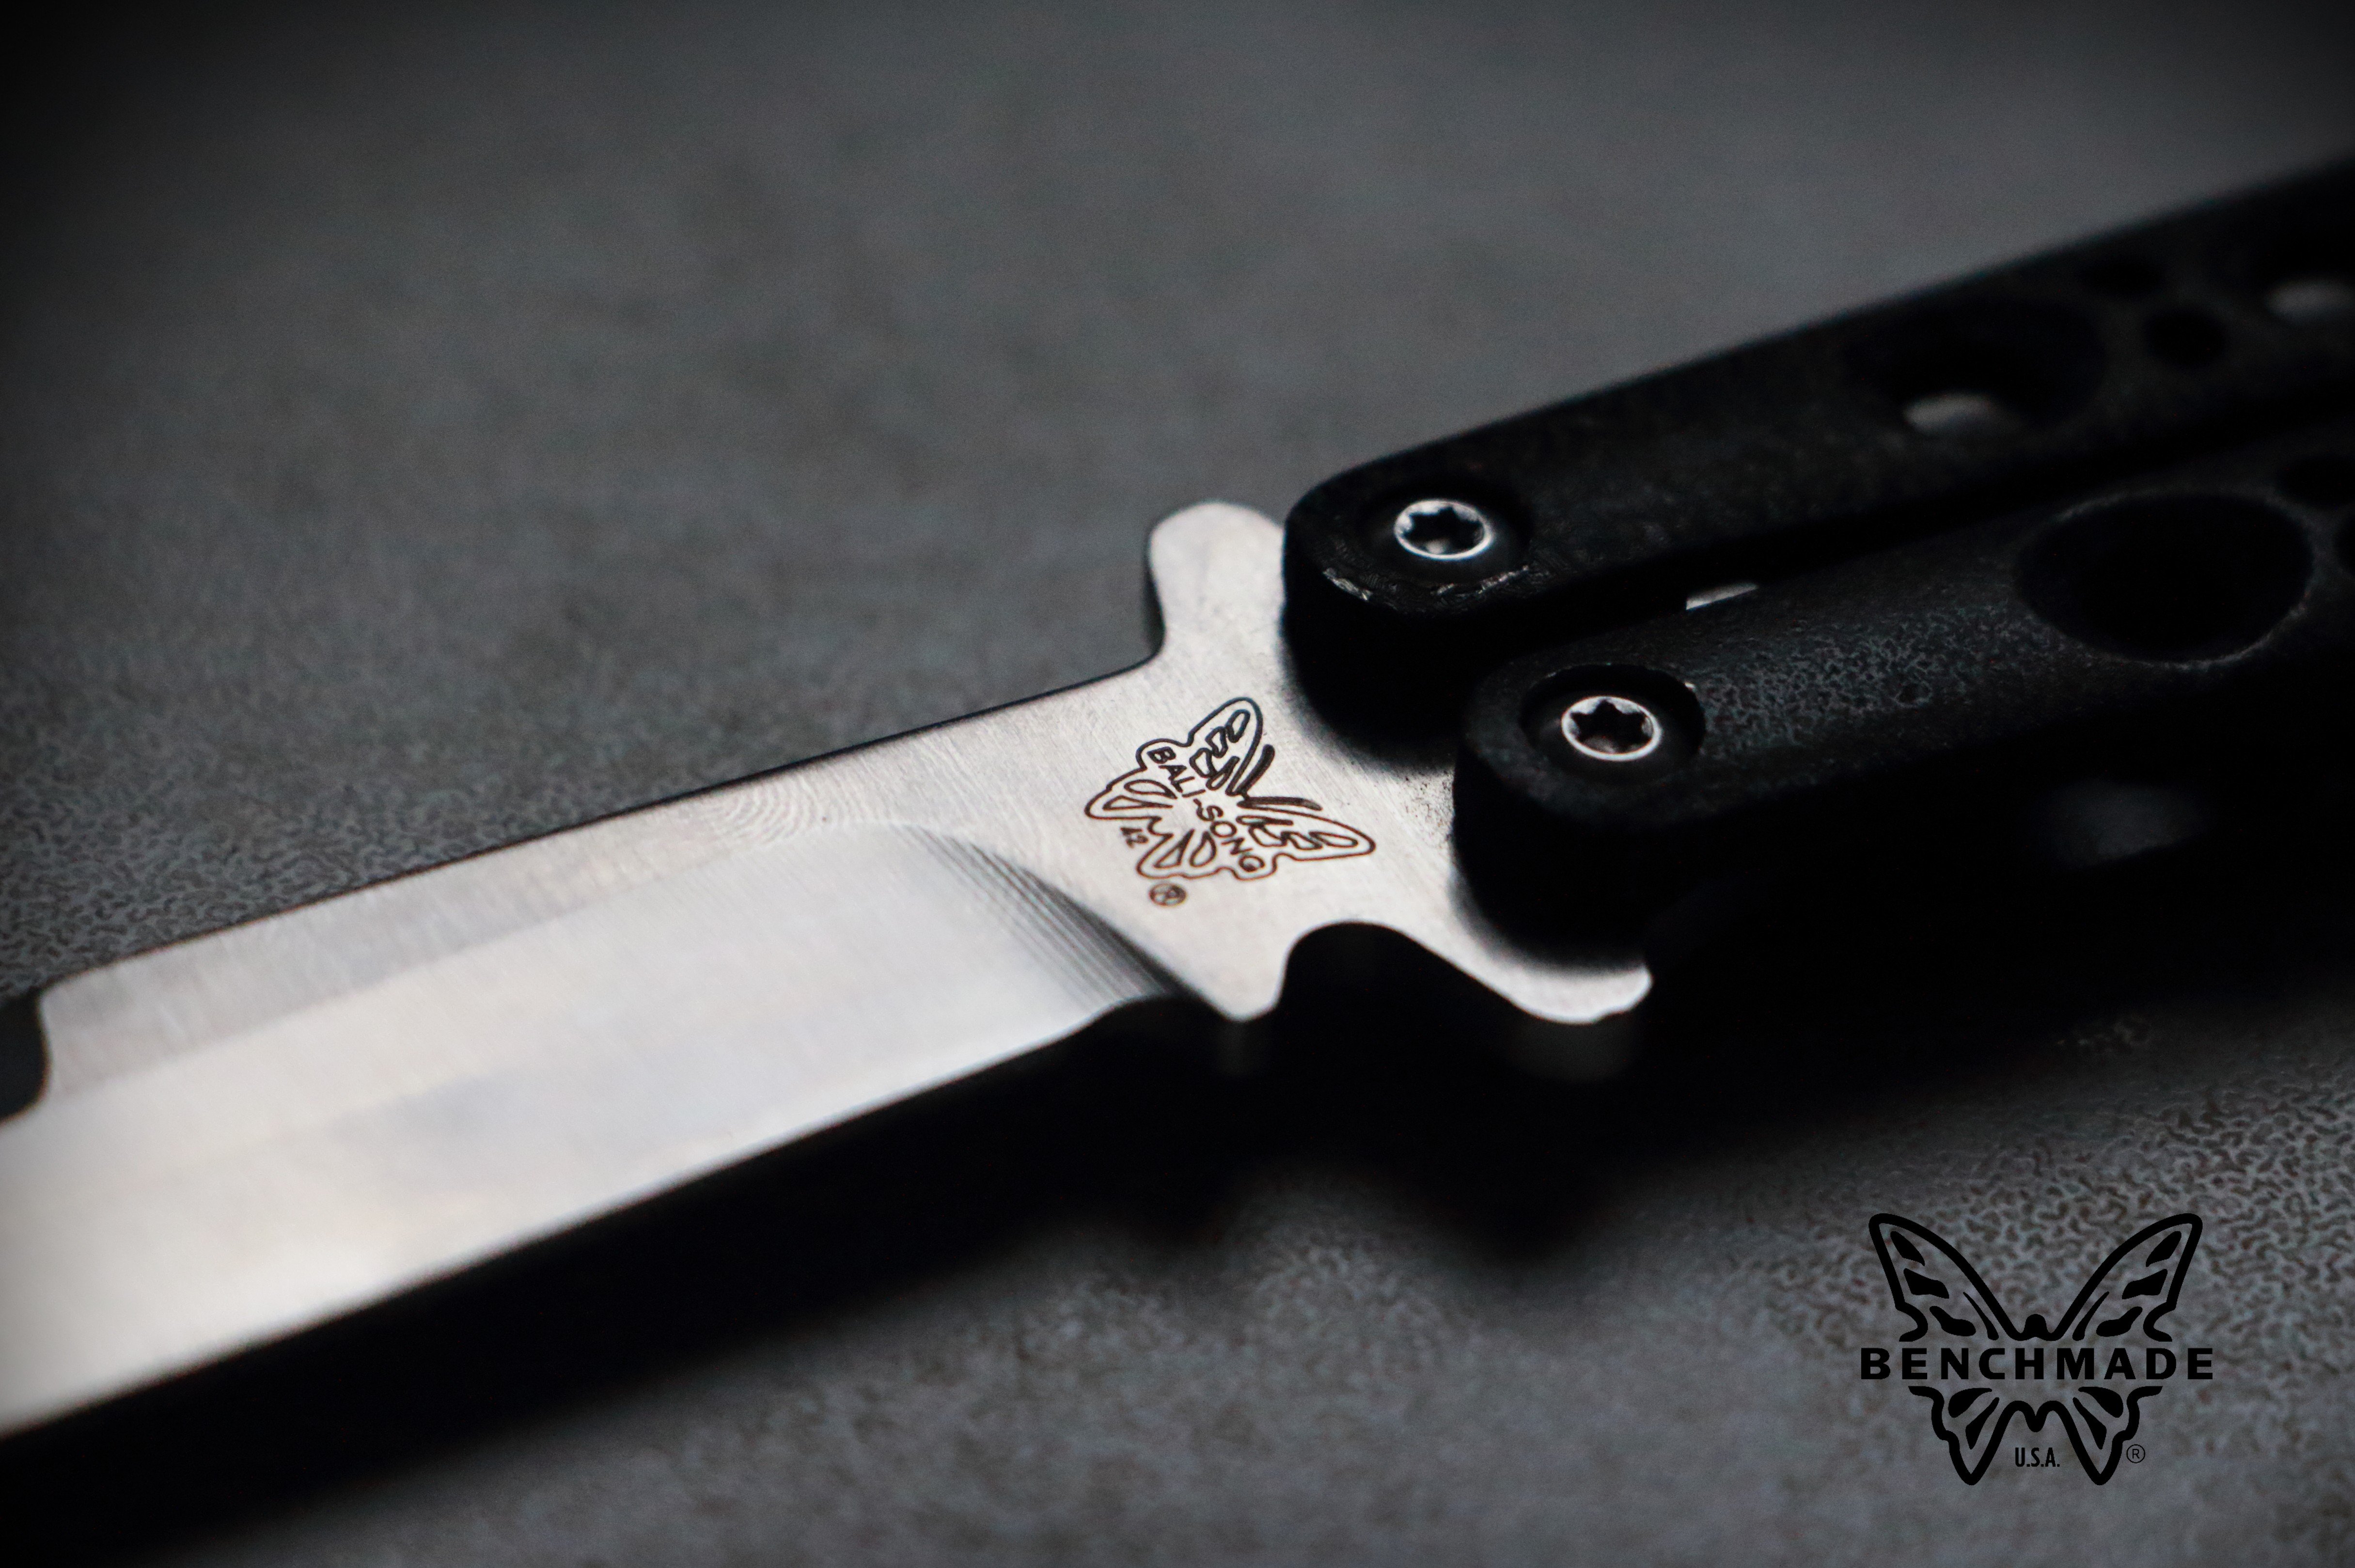 benchmade, Butterfly knives, Knife, Balisong Wallpaper